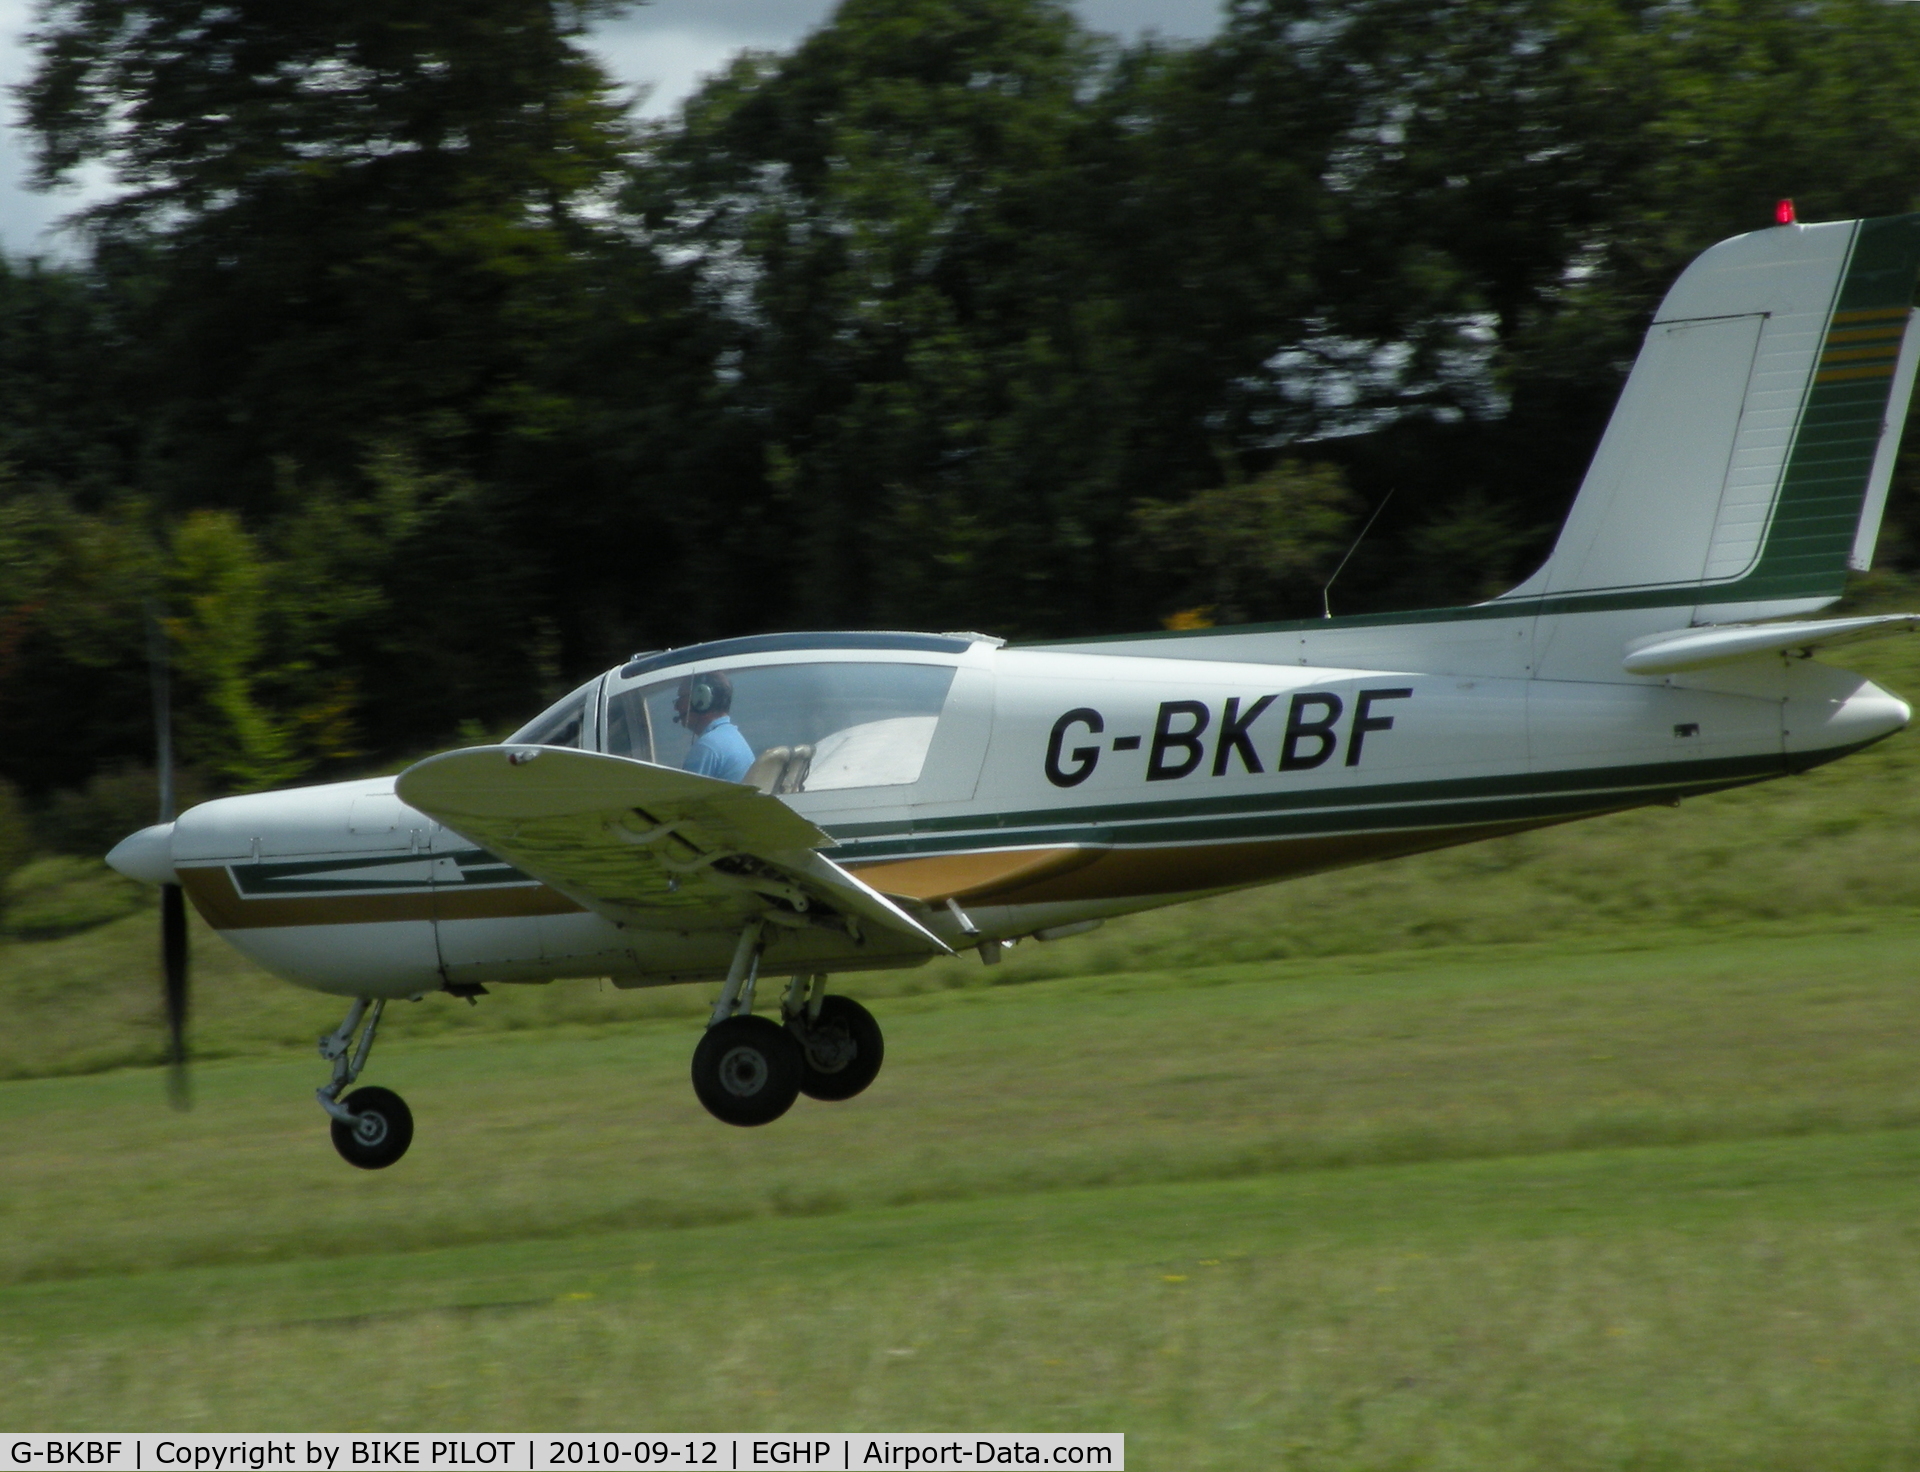 G-BKBF, 1970 Socata MS.894A Rallye Minerva 220 C/N 11622, Bravo Kilo about to touch down on rwy 03